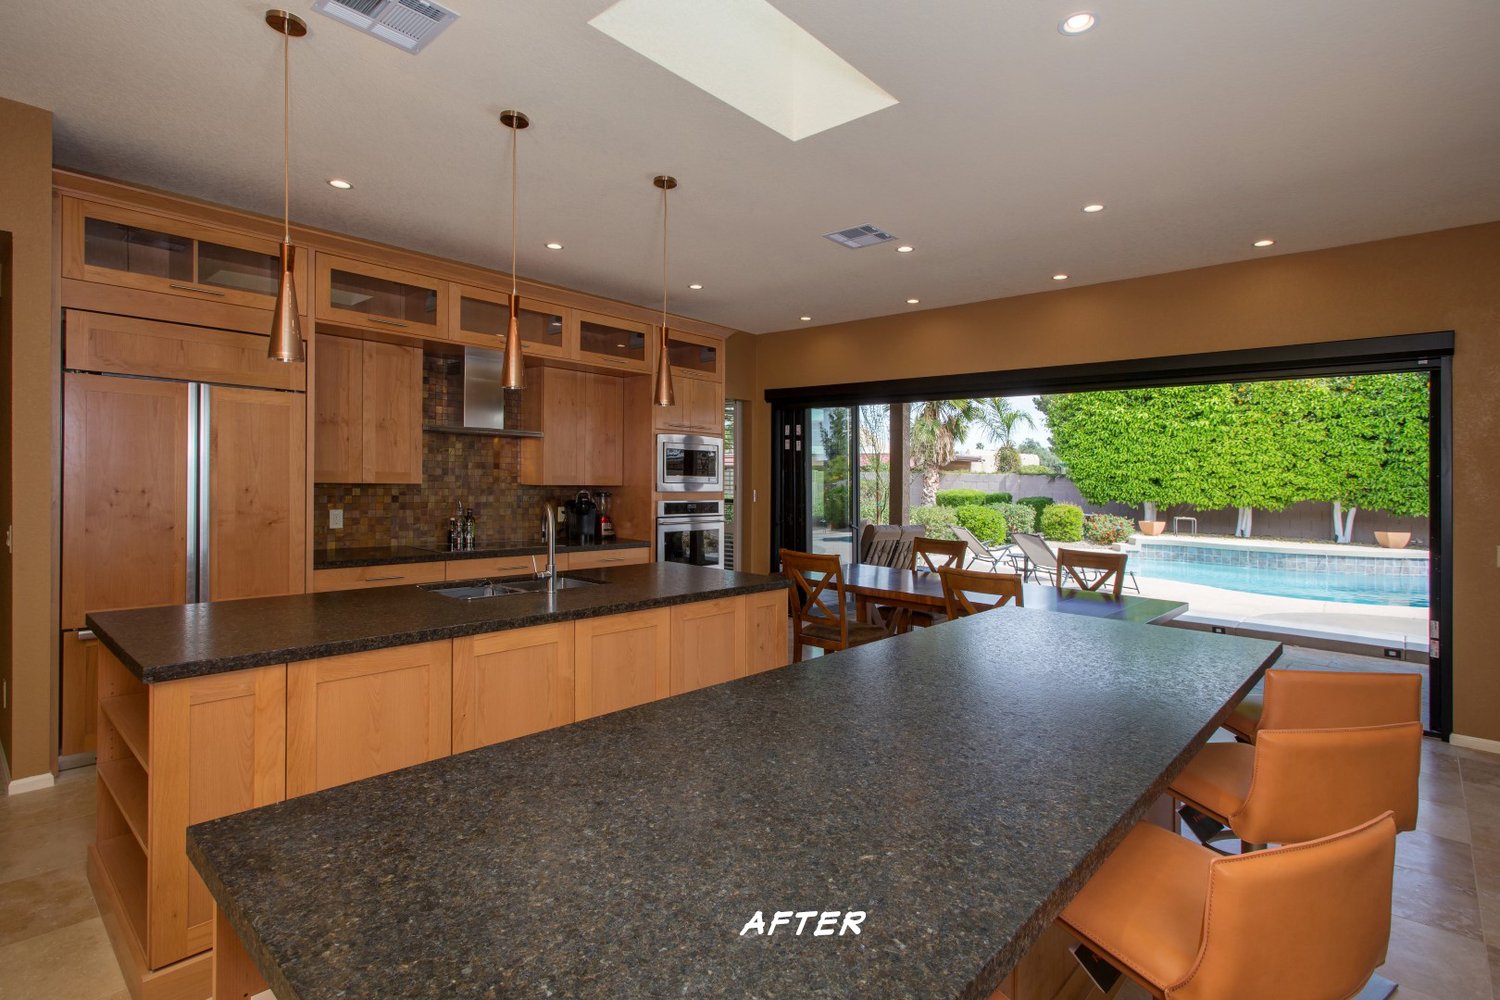 paradise valley, az kitchen remodel contractor, hochuli design and remodeling team